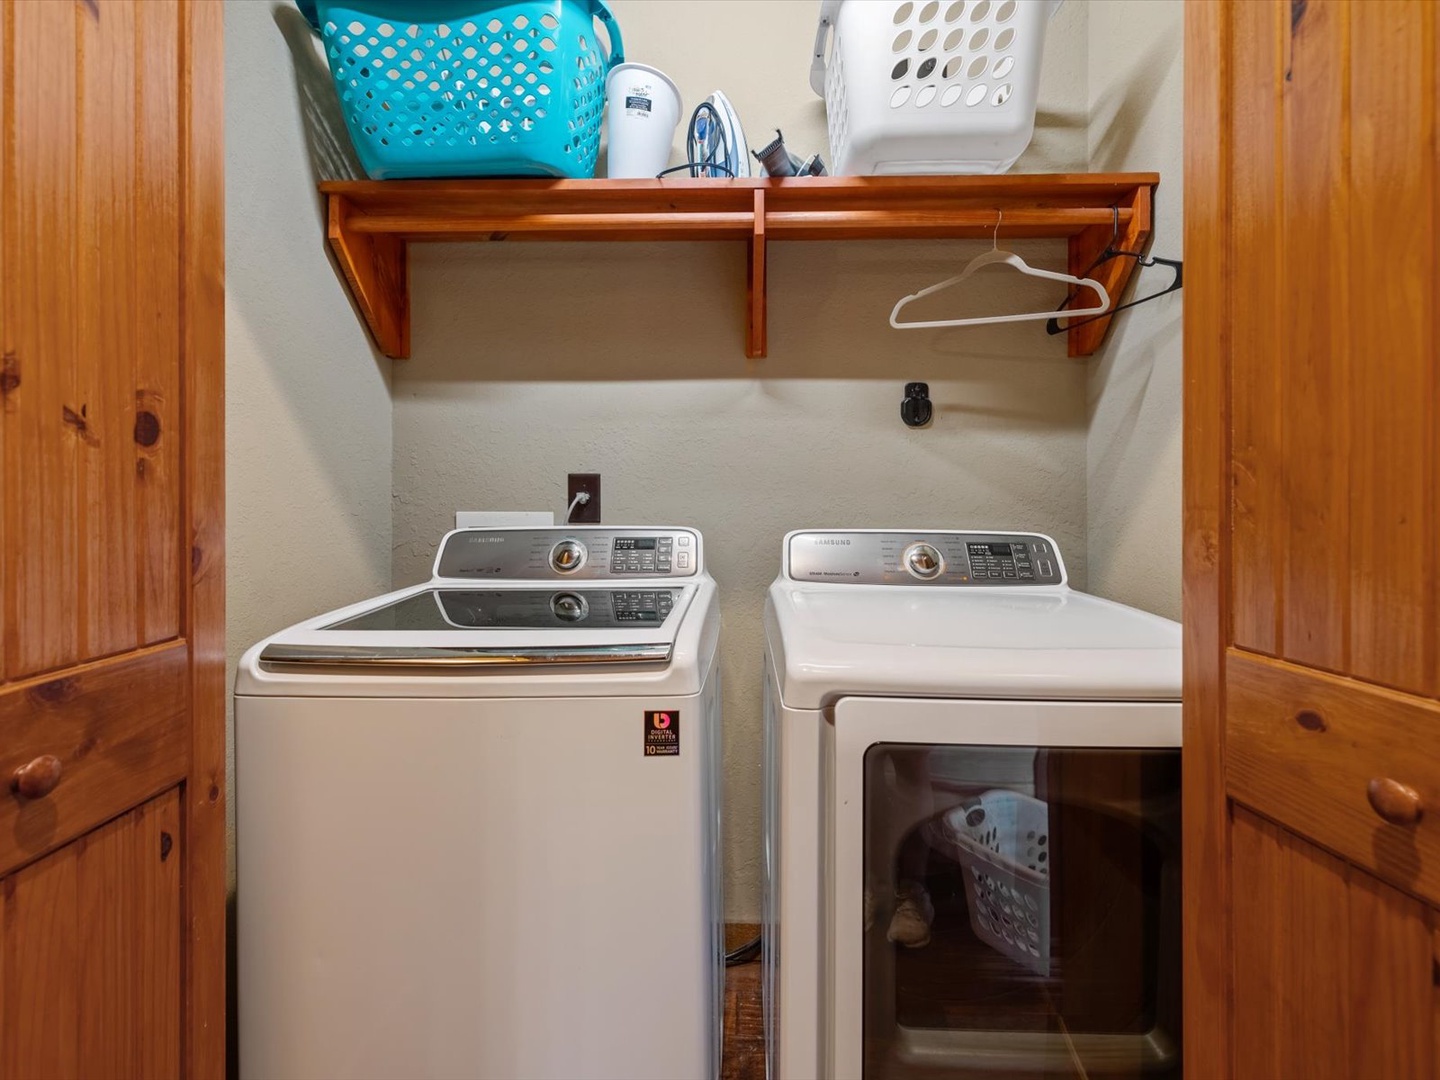 Crows Nest- Entry level laundry room